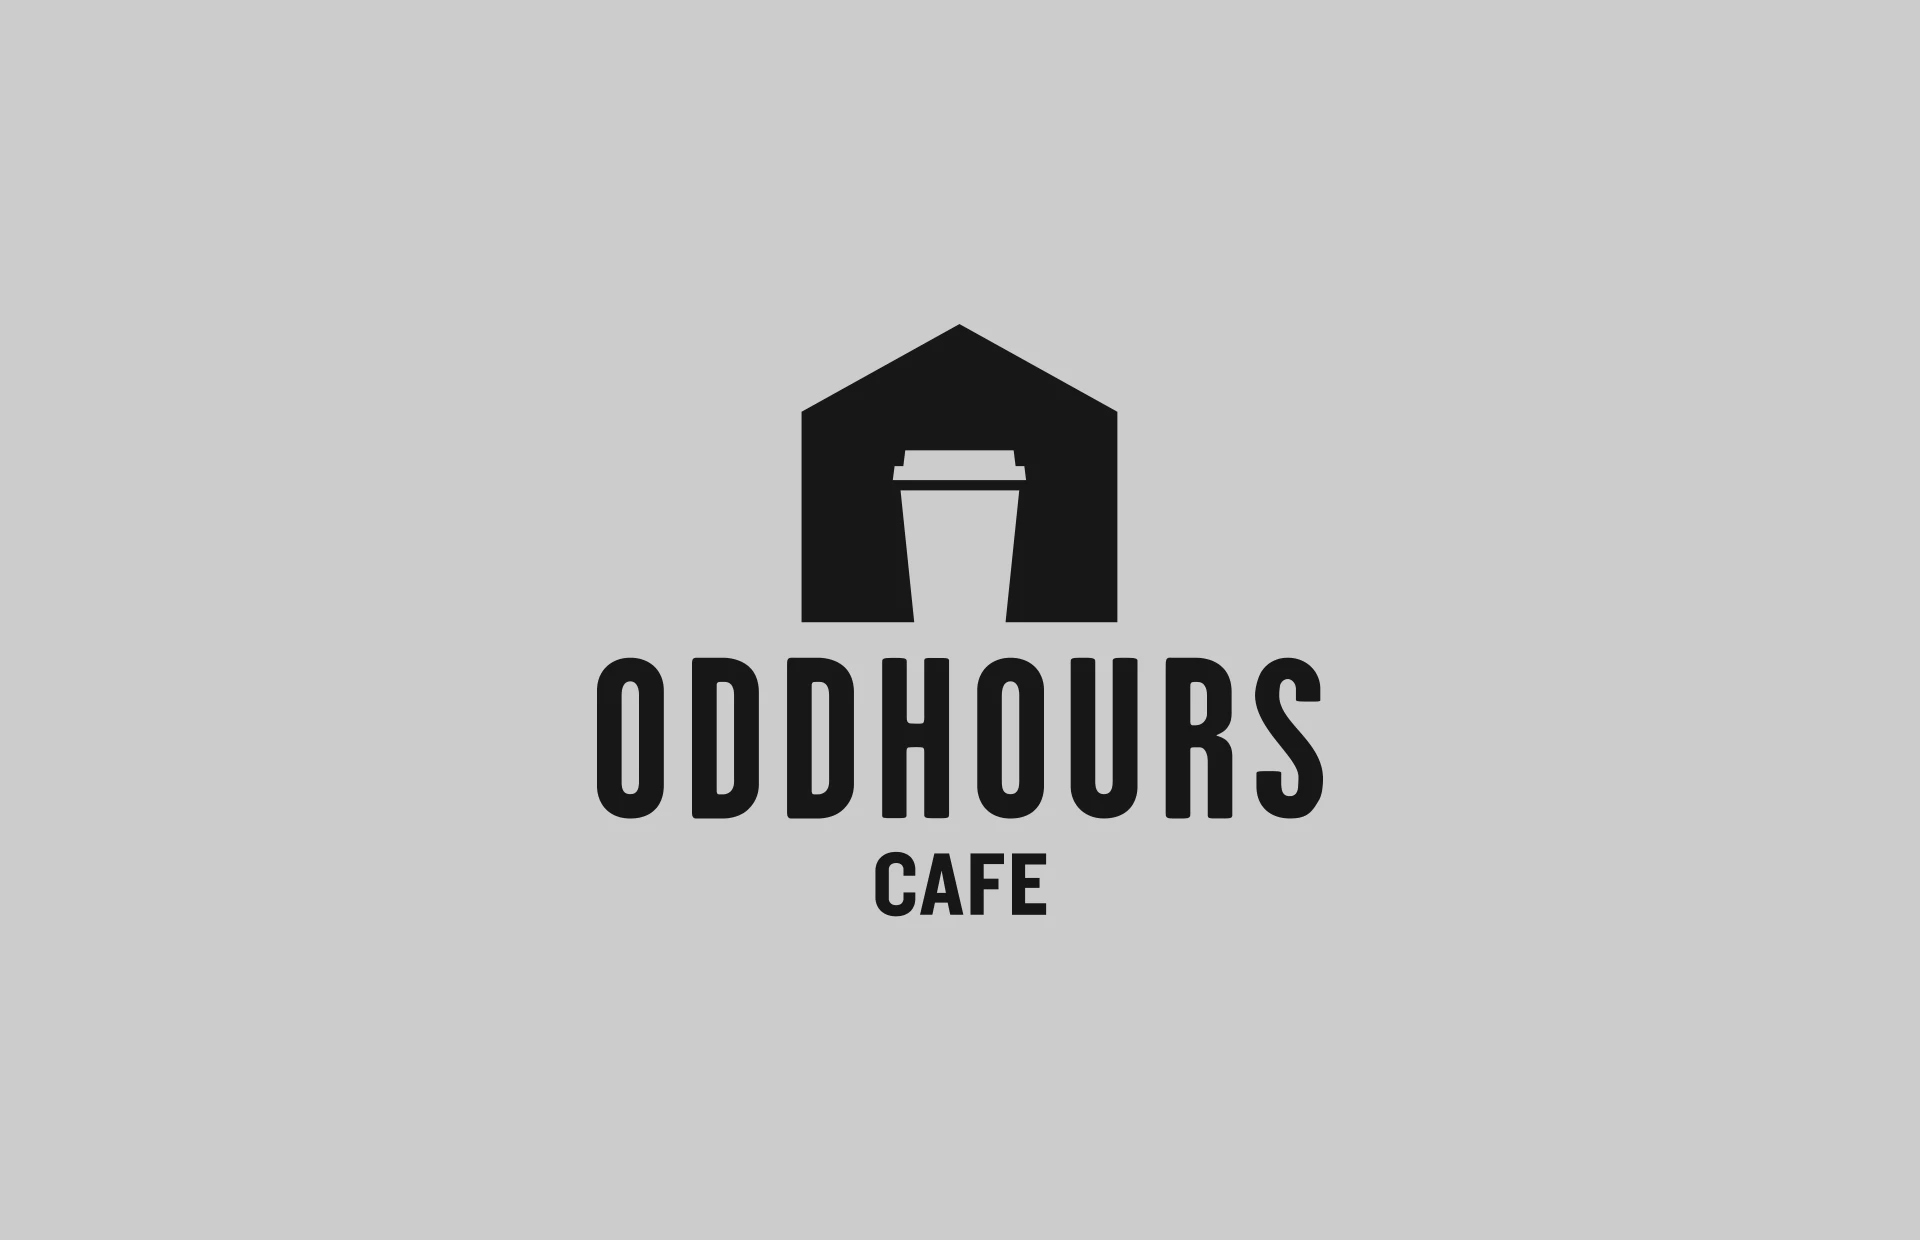 oddhours cafe logo made showing wordmark and house logo with takeaway coffee cup for a door